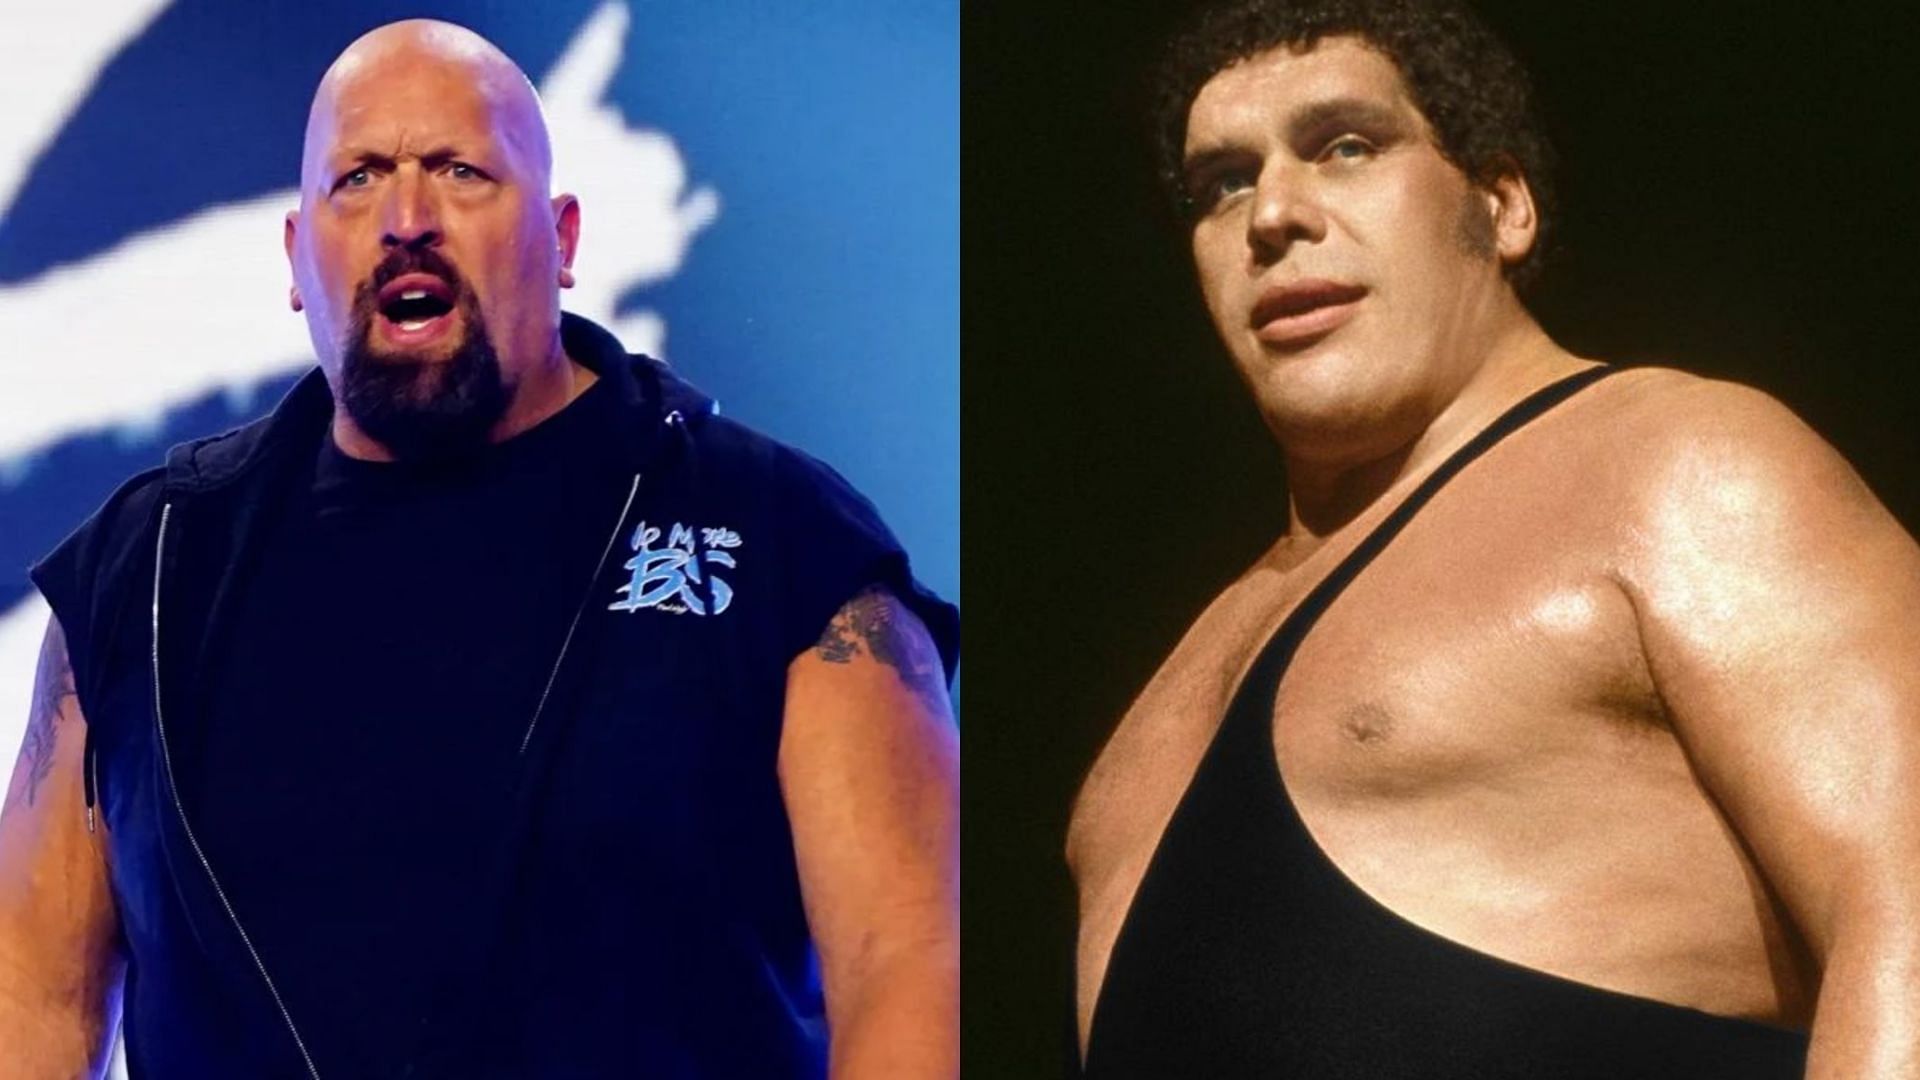 Paul Wight (left) and Andre The Giant (right).